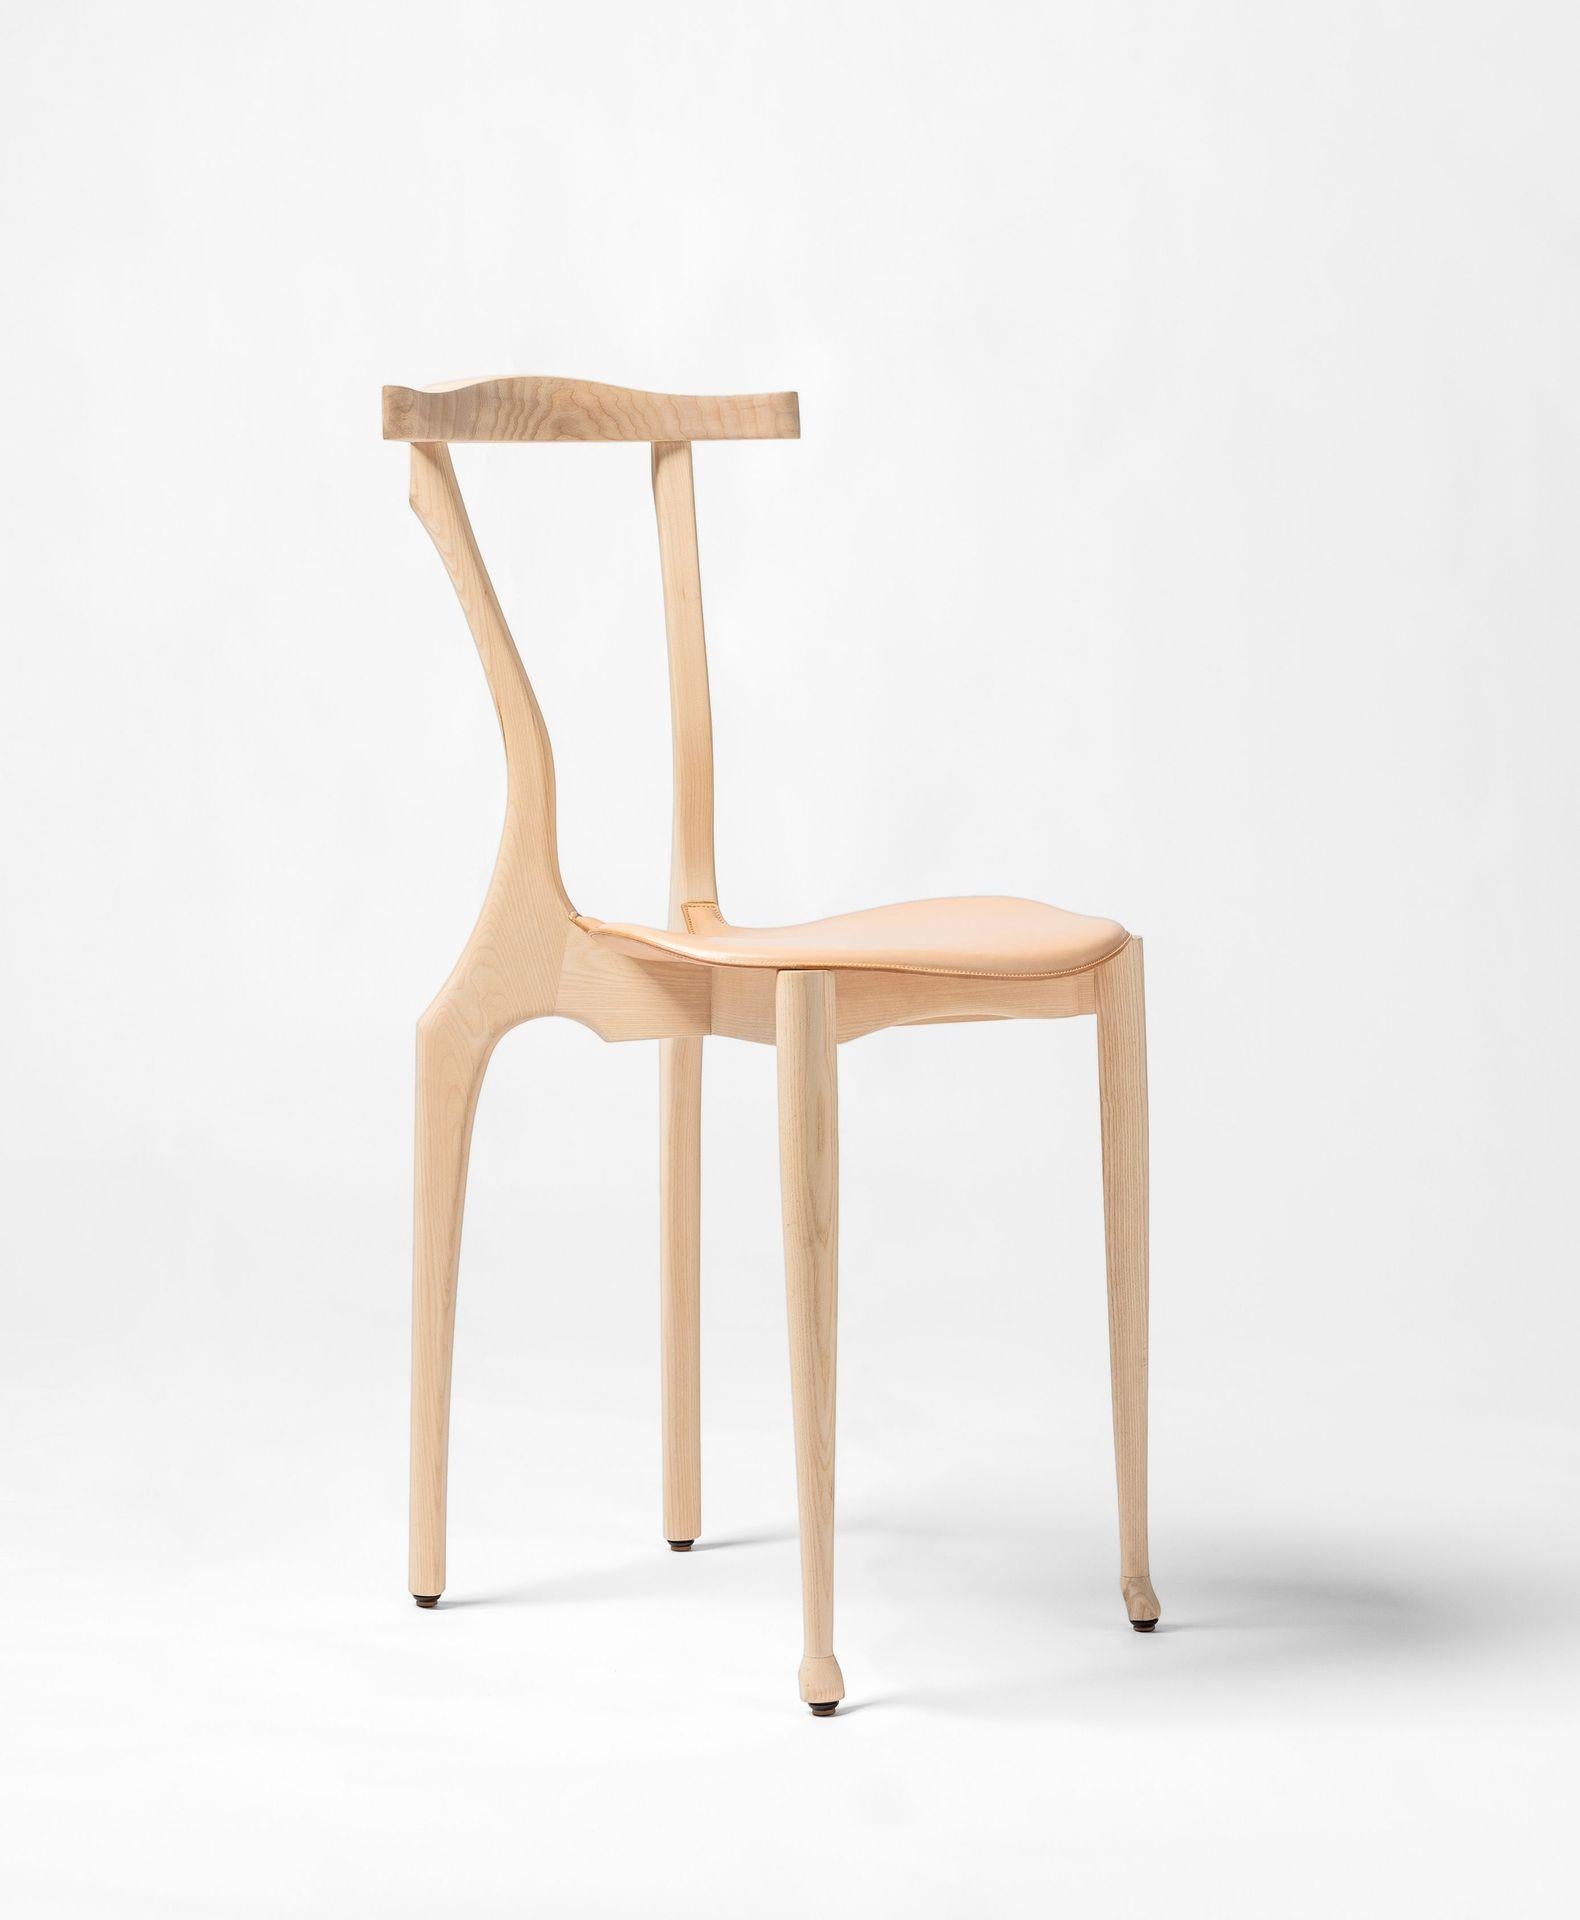 Gaulinetta natural chair by Oscar Tusquets
Dimensions: D40 x W52 x H 83 cm.
Materials: ash wood

The Gaulino chair was designed in 1987. BD re-edited it, improving it in 2010. It’s probably one of the best designs by Oscar Tusquets. Even though